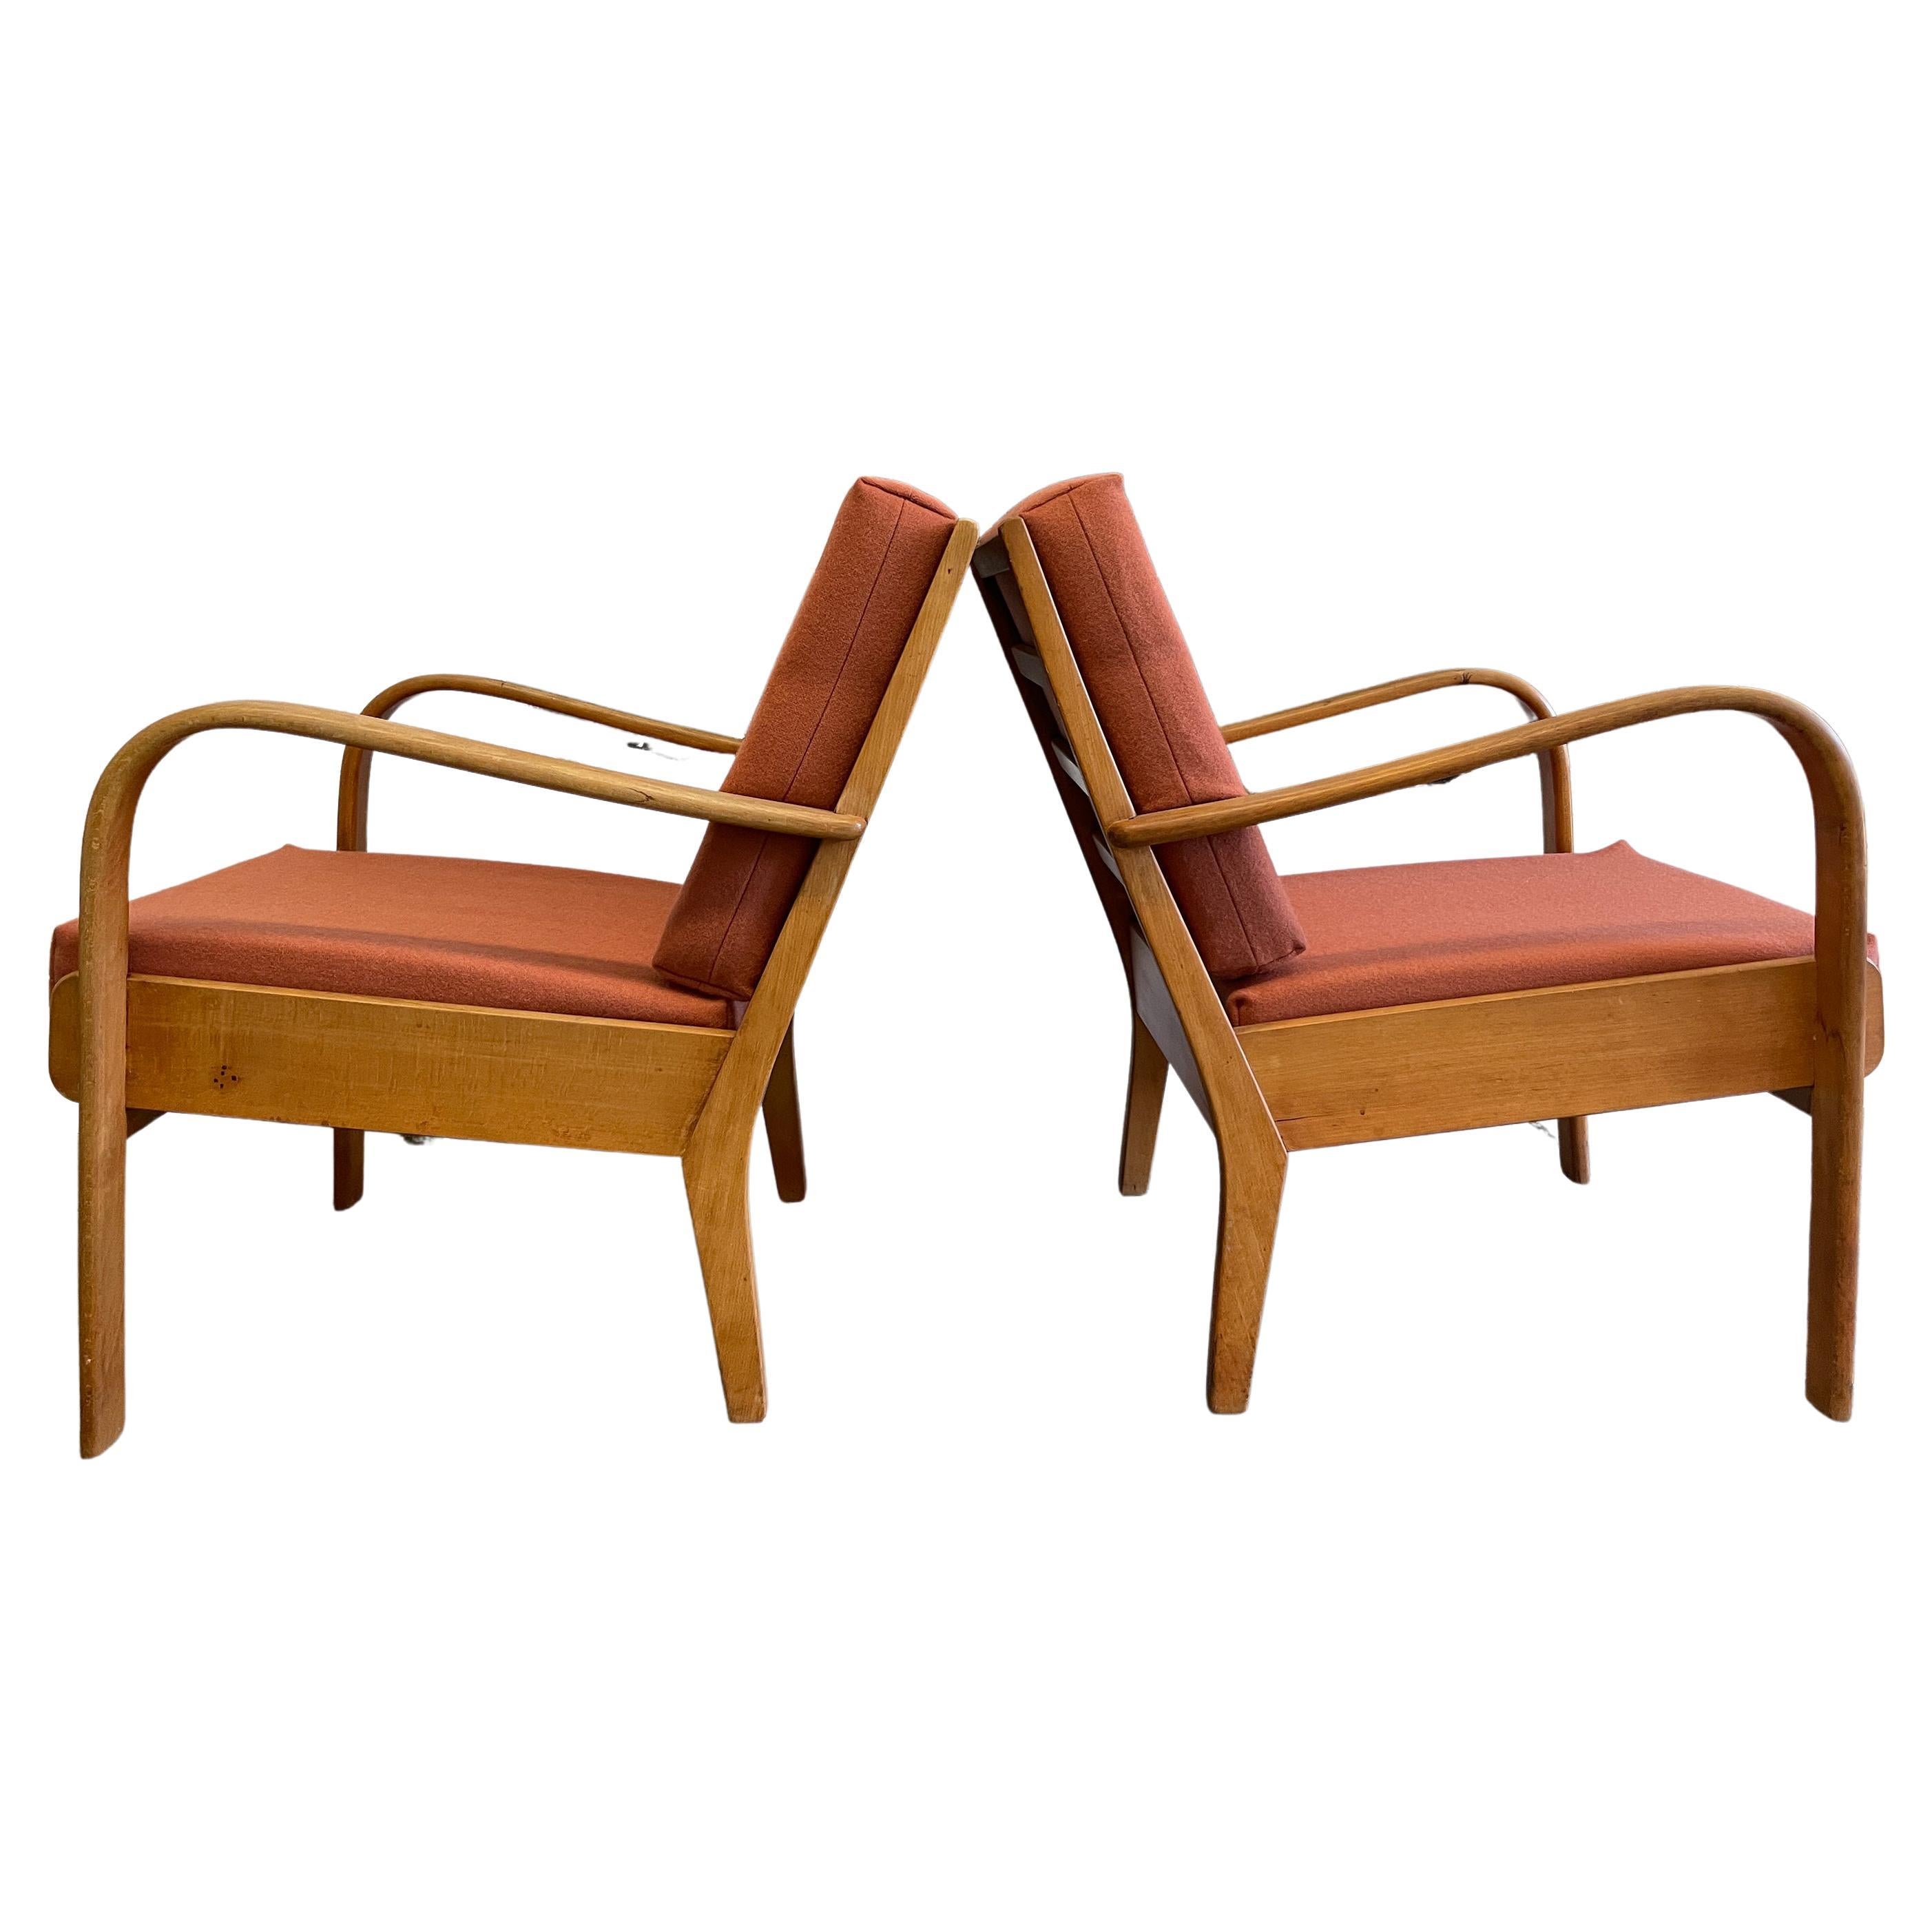 Pair of Midcentury Swedish Low Bent Wood Arm Chairs Lounge Chairs For Sale